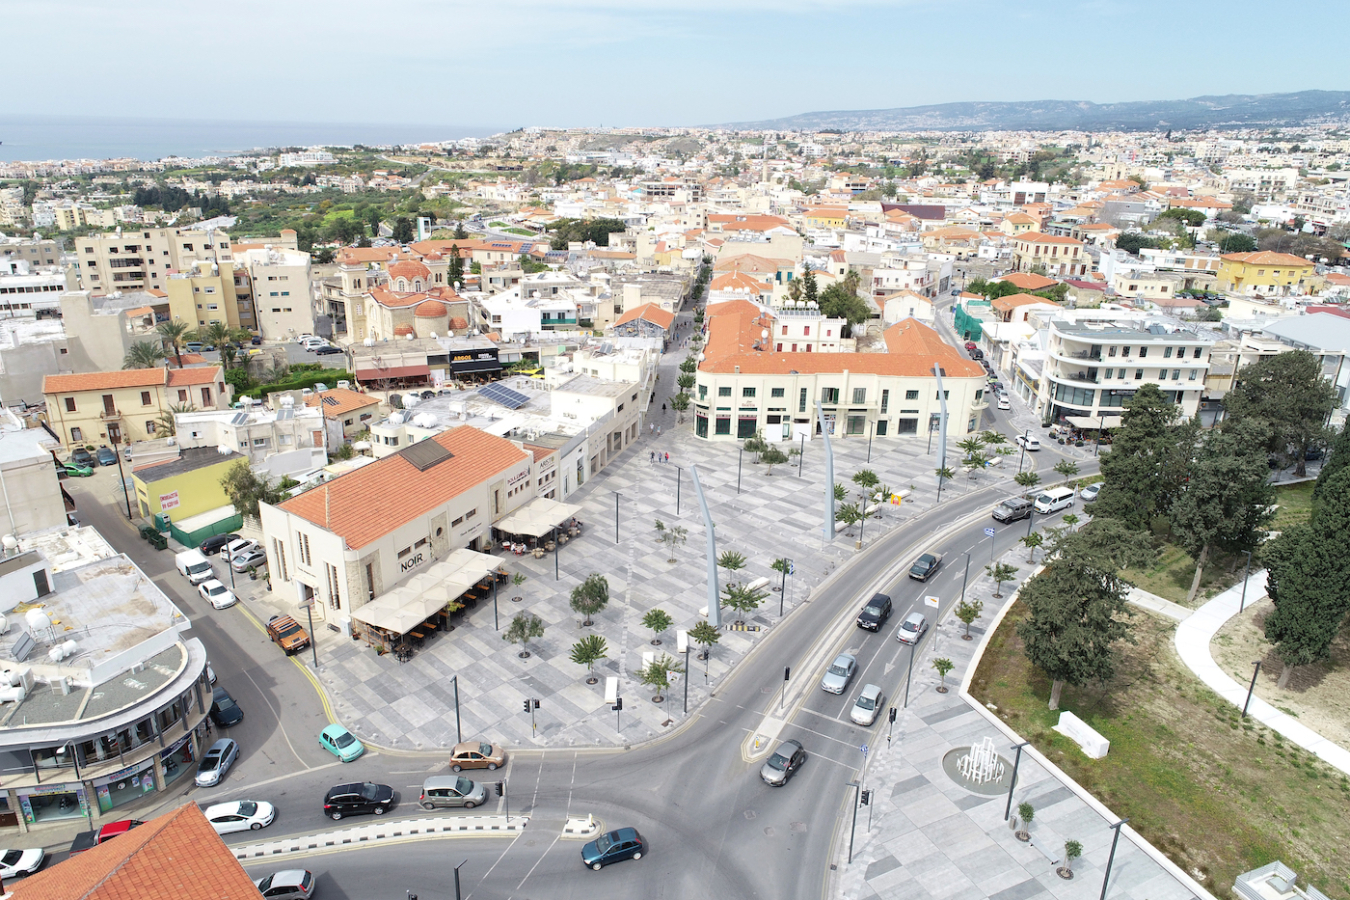 PAPHOS HISTORIC CENTRE AND KENNEDY SQUARE